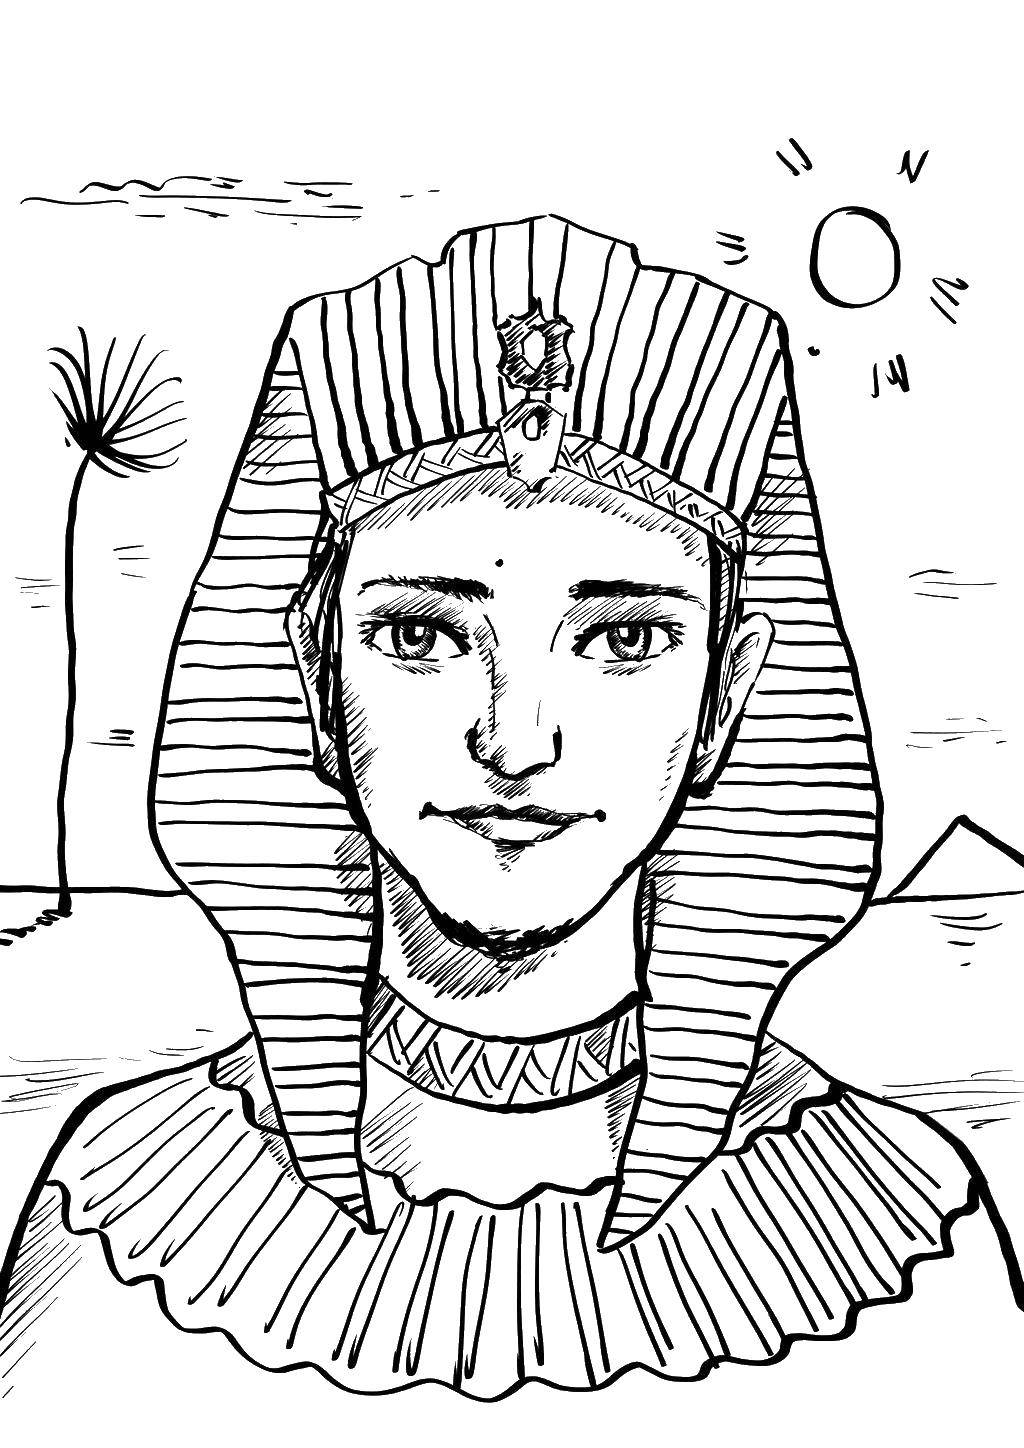 Coloring The Pharaoh in Egypt. Category Egypt. Tags:  Egypt.